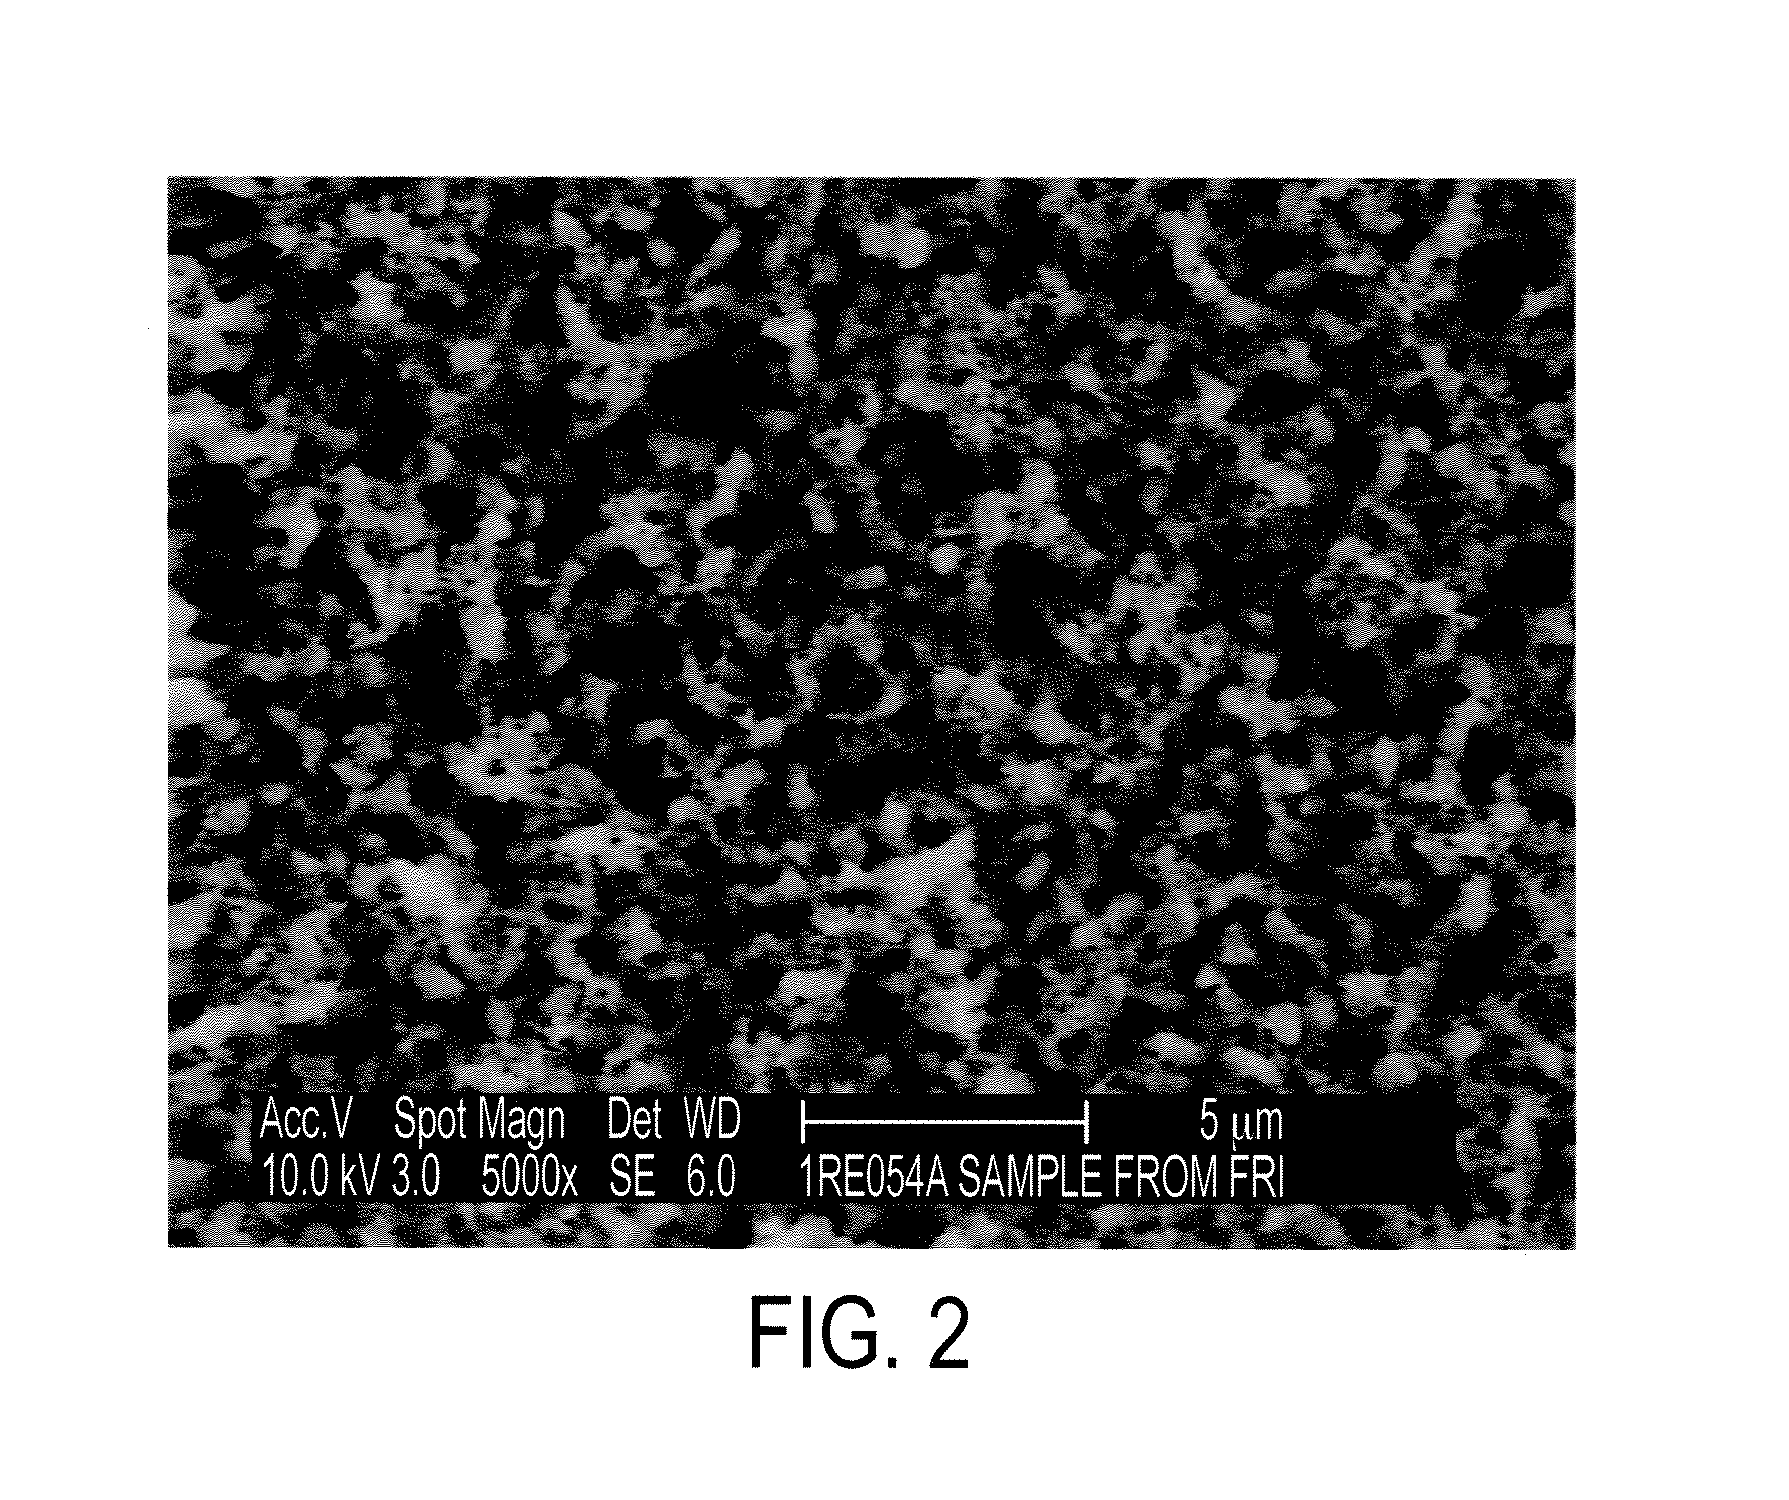 Multicomponent nanoparticle materials and process and apparatus therefor